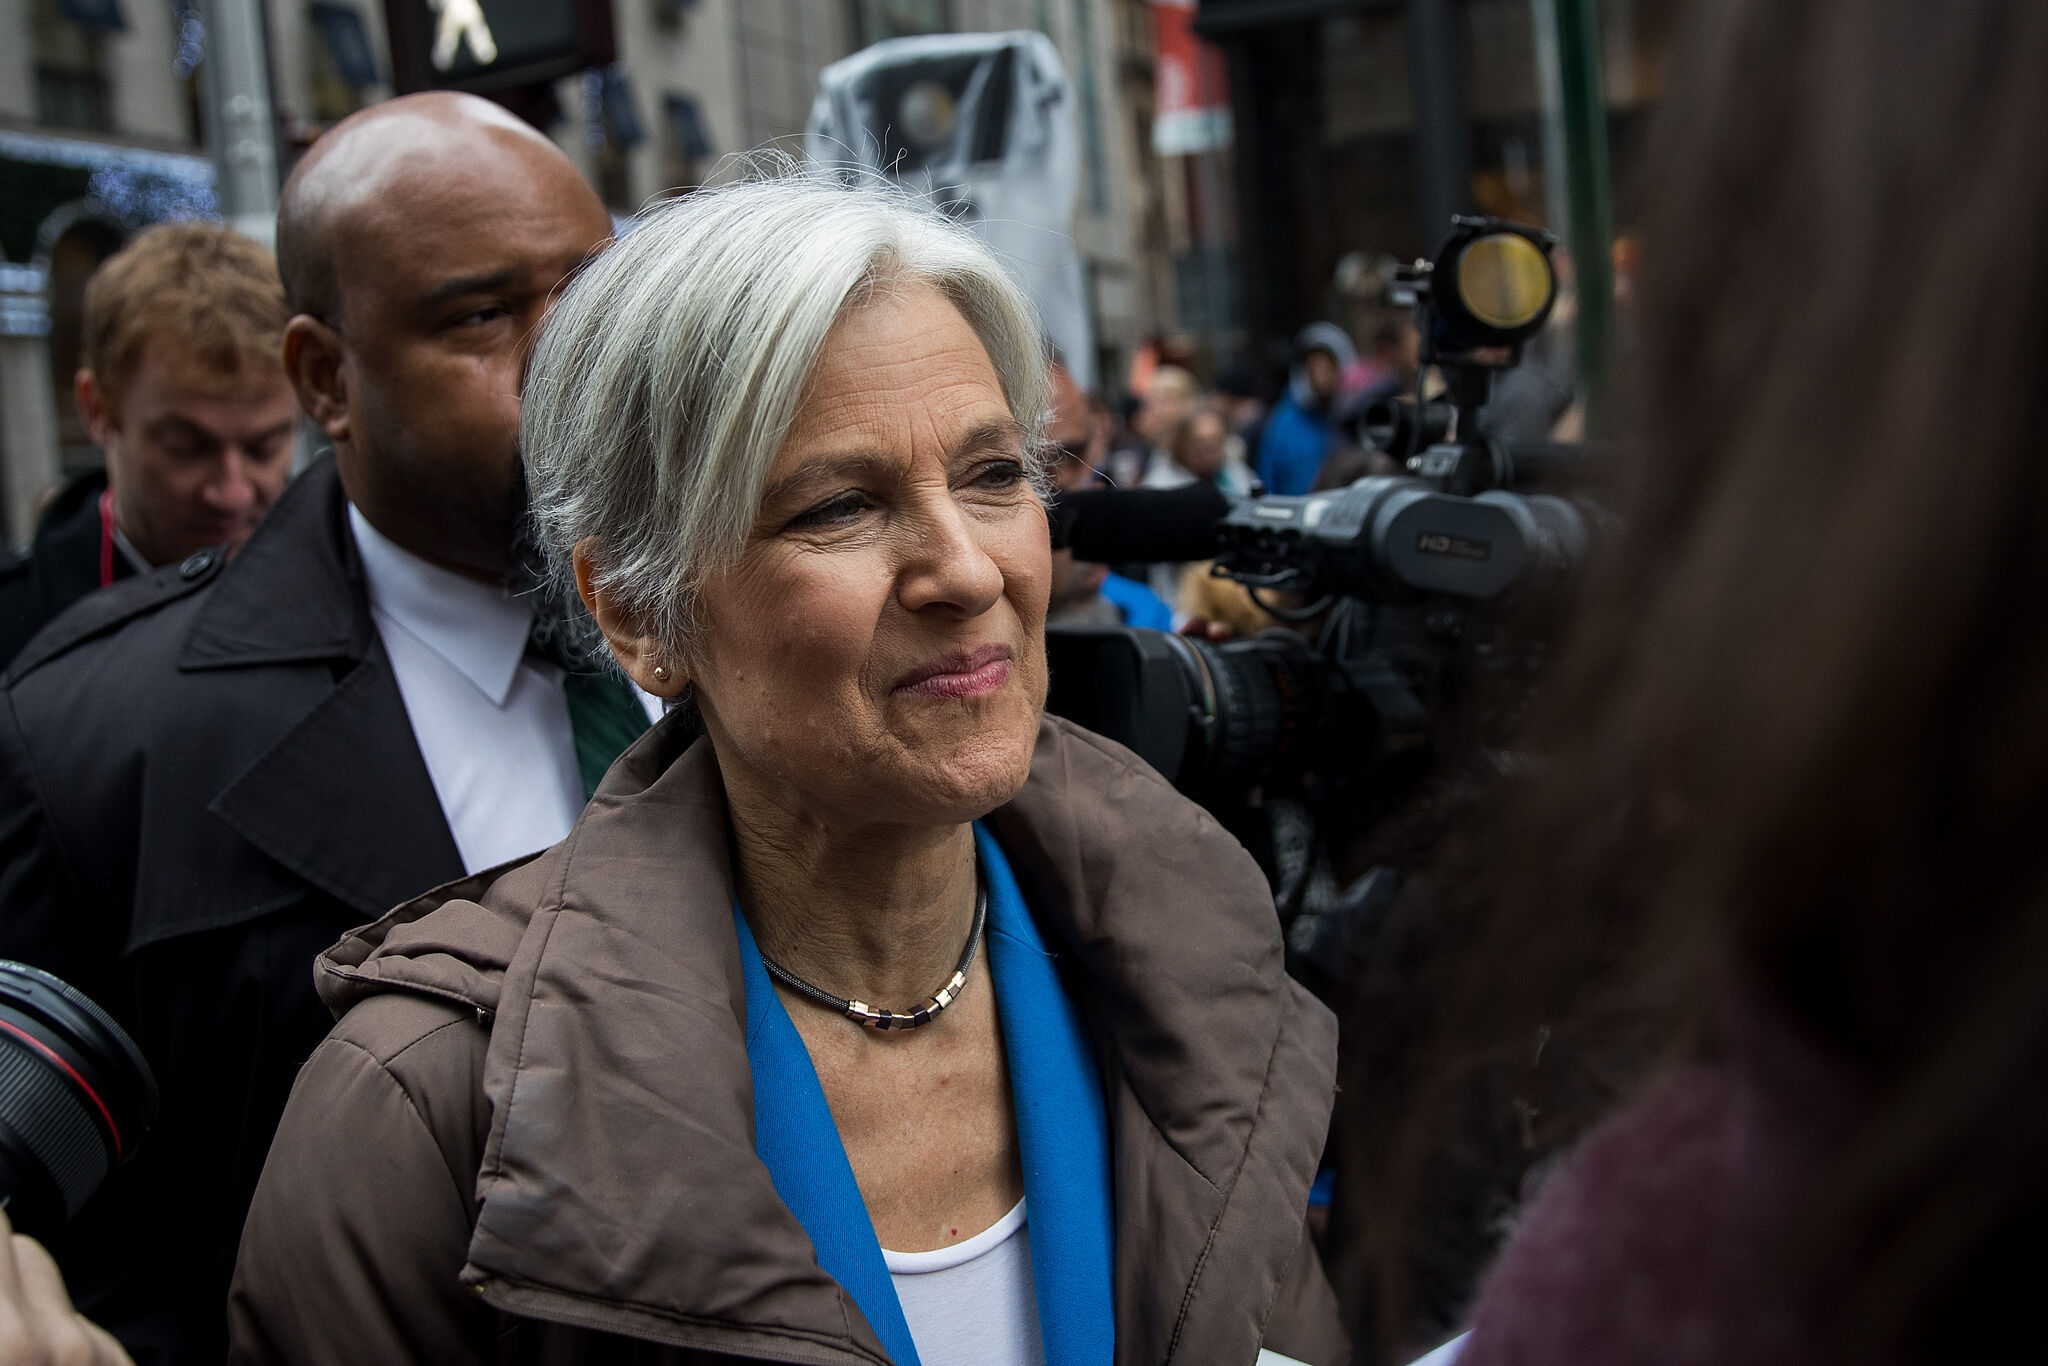  Presidential hopeful Dr. Jill Stein arrested at pro-Palestine protest 